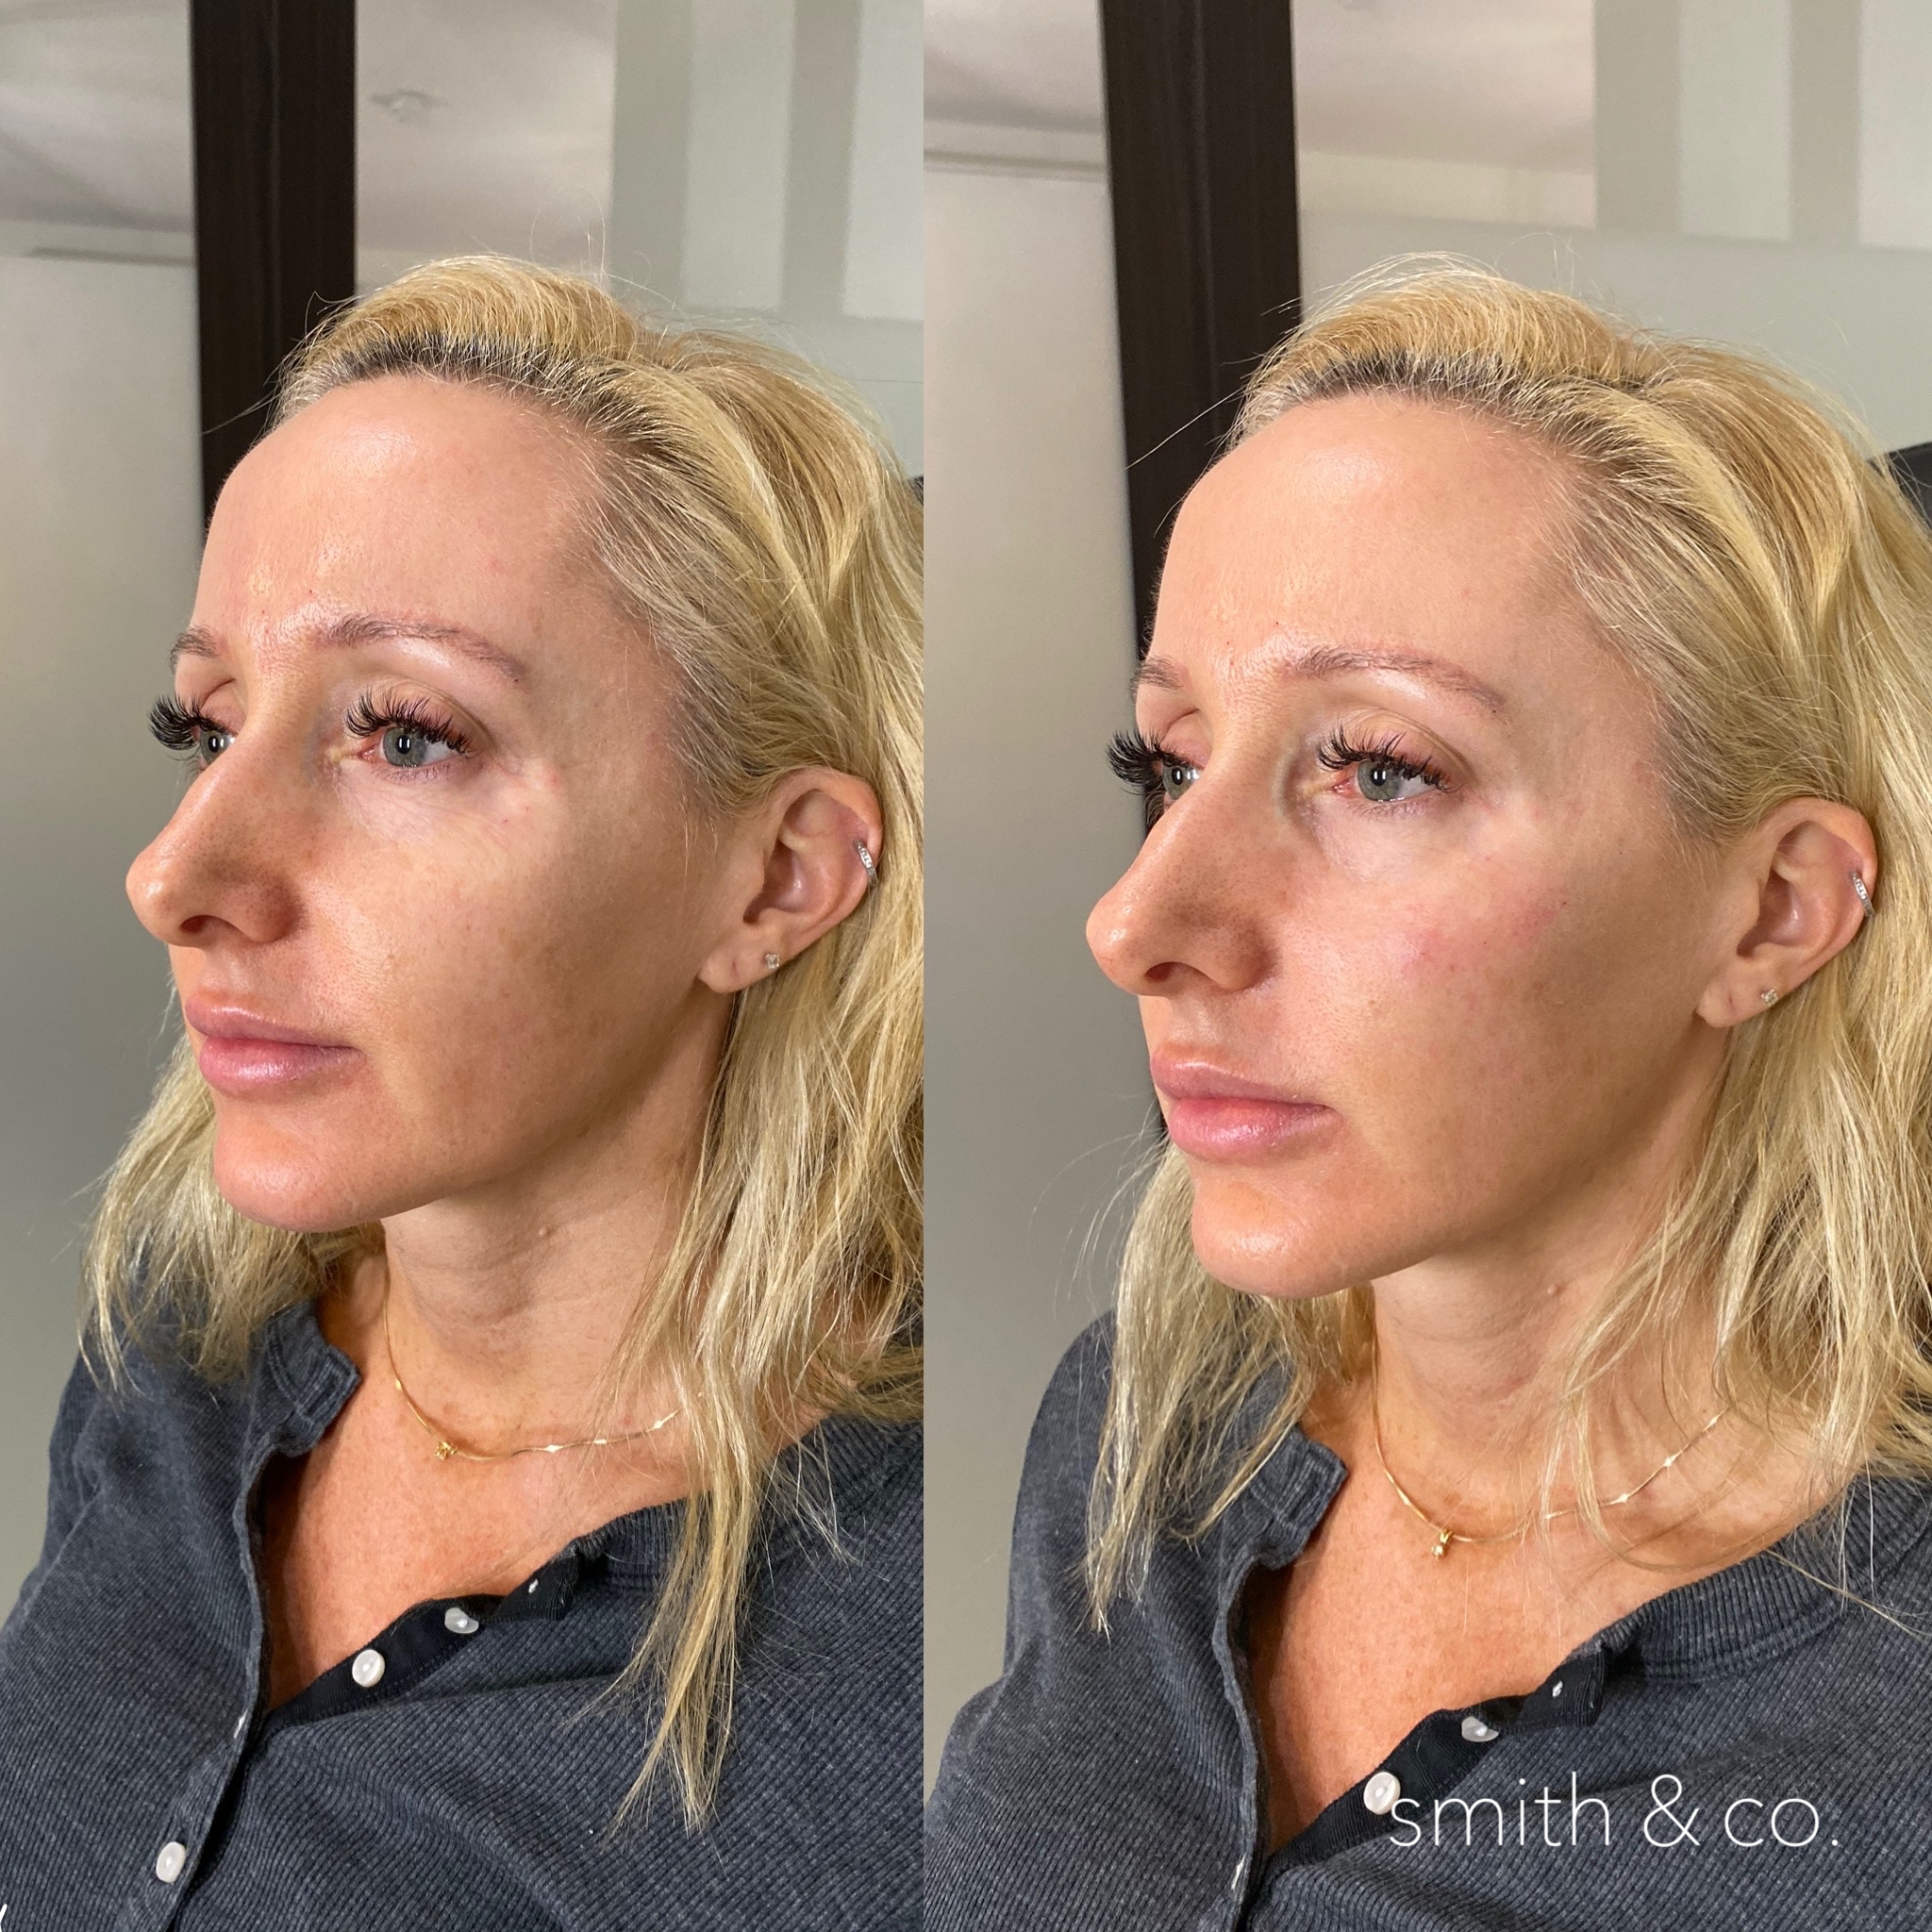 jawline contour with filler, cheek and temple filler